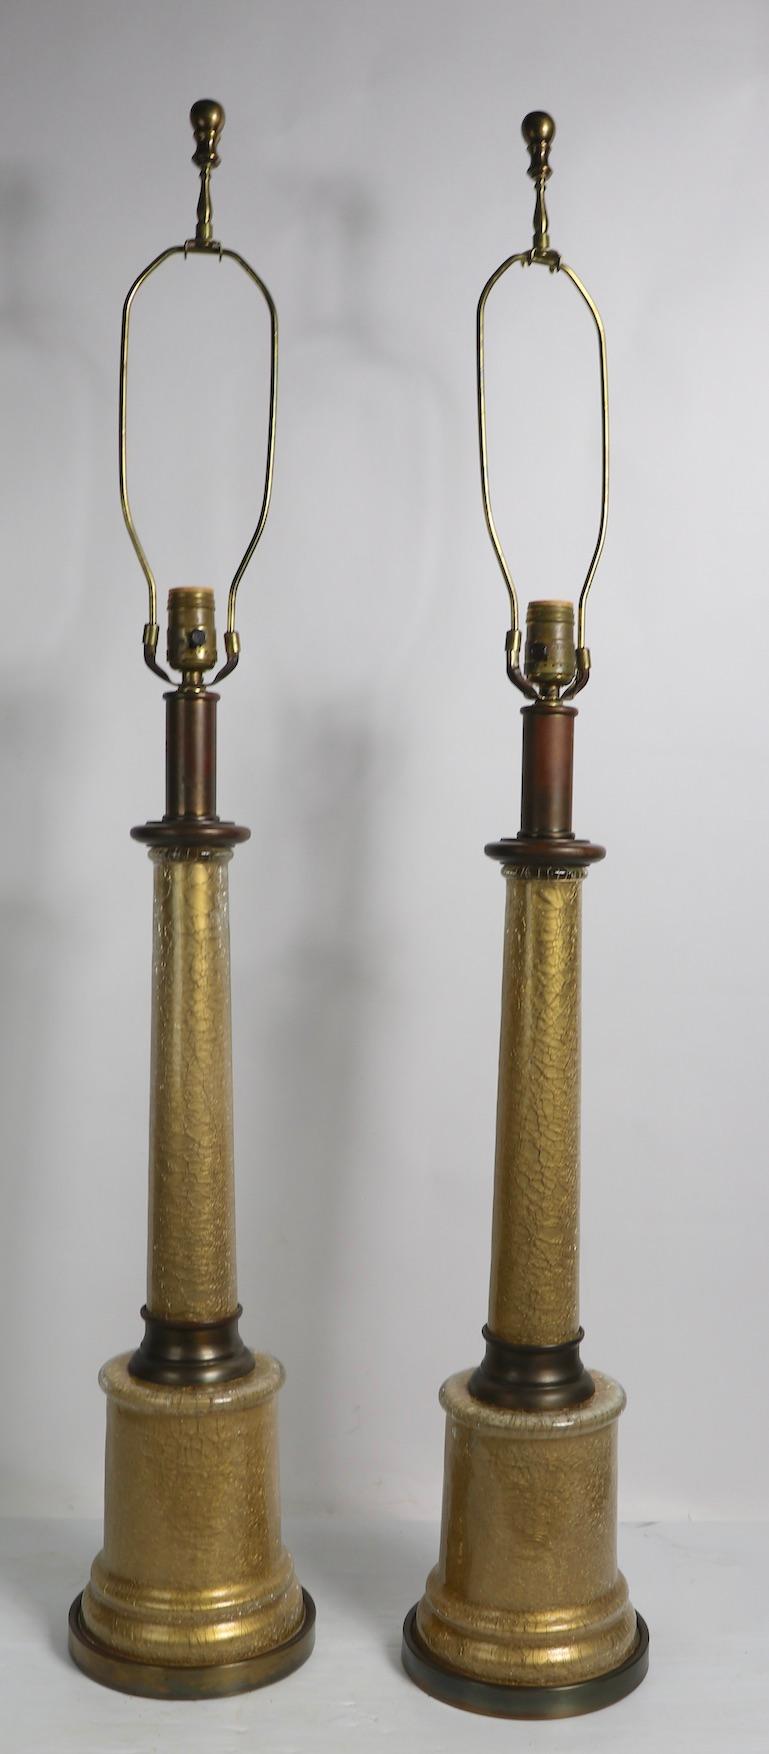 Chic pair of glass column lamps in gold crackle finish with brass fittings, made by Paul Hanson. Both al ps are in fine, original, working and clean condition. Classical Column form, in tailored modern style, perfect for both traditional, modern,